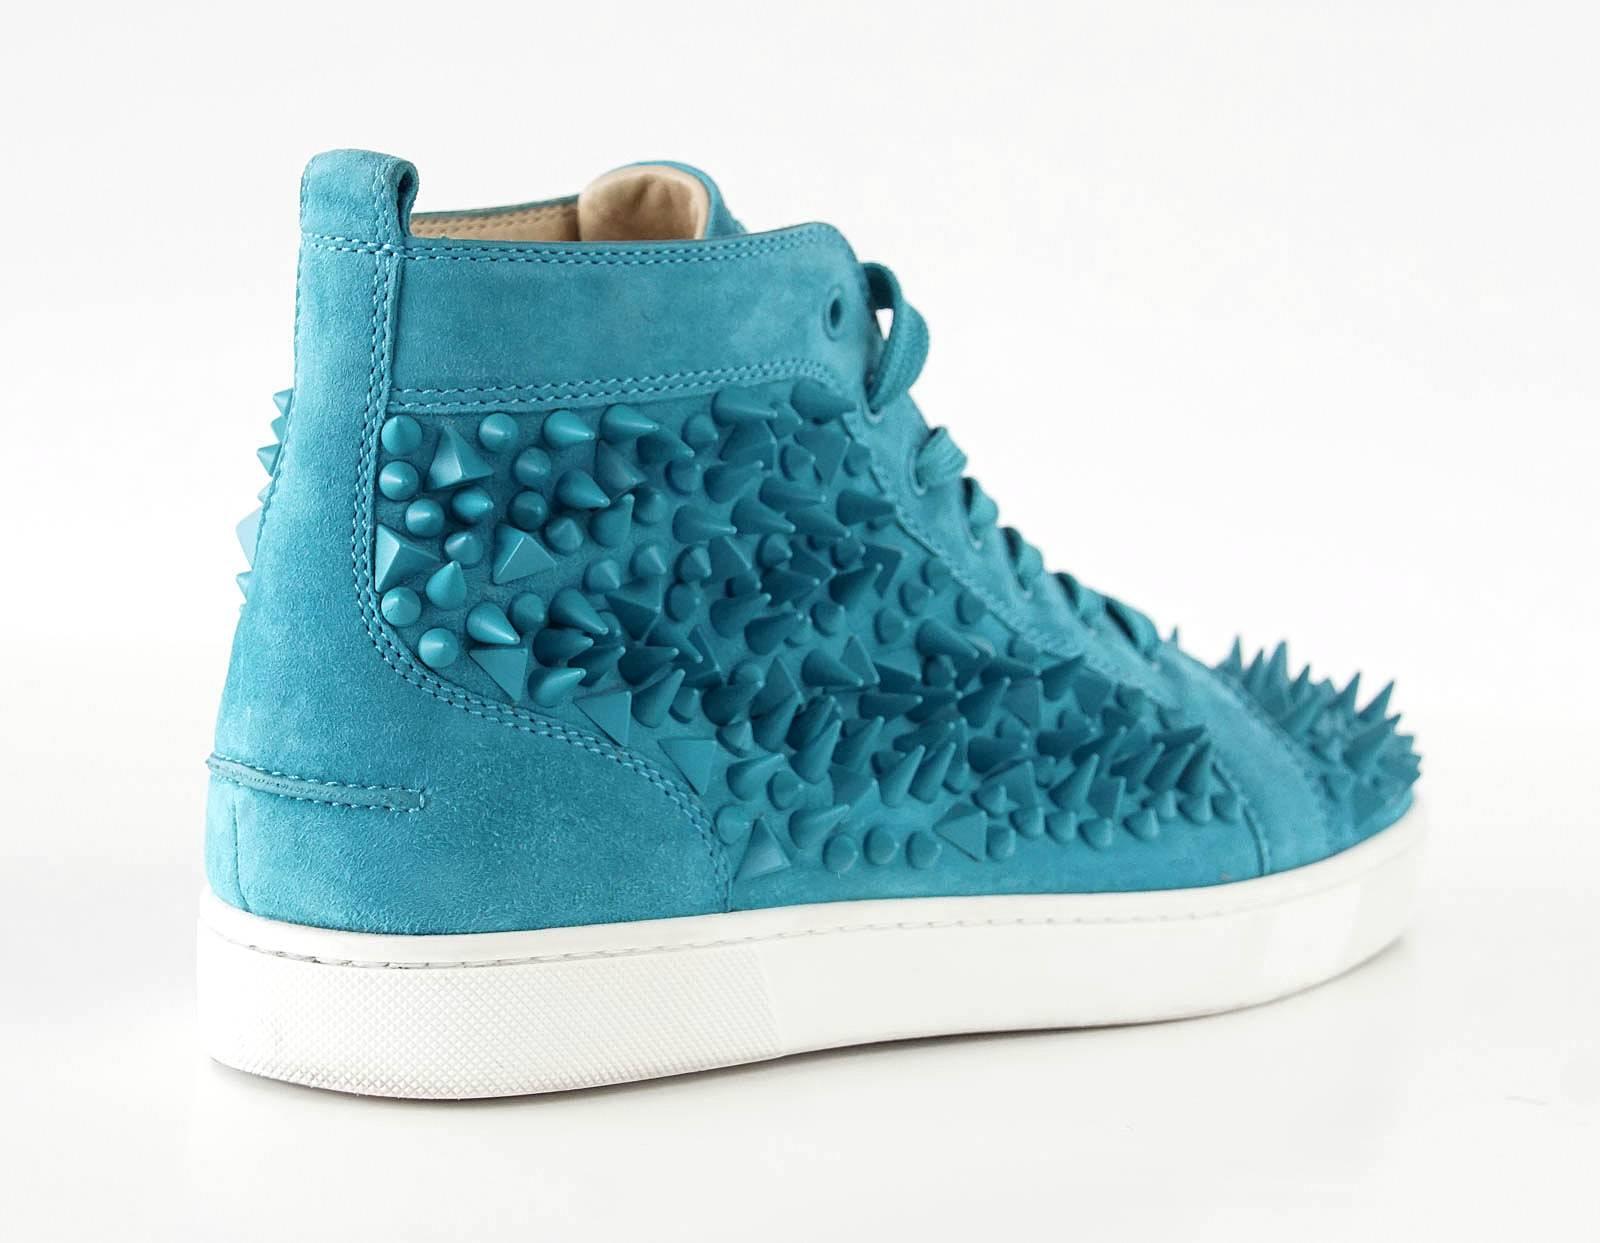 christian louboutin turquoise shoes